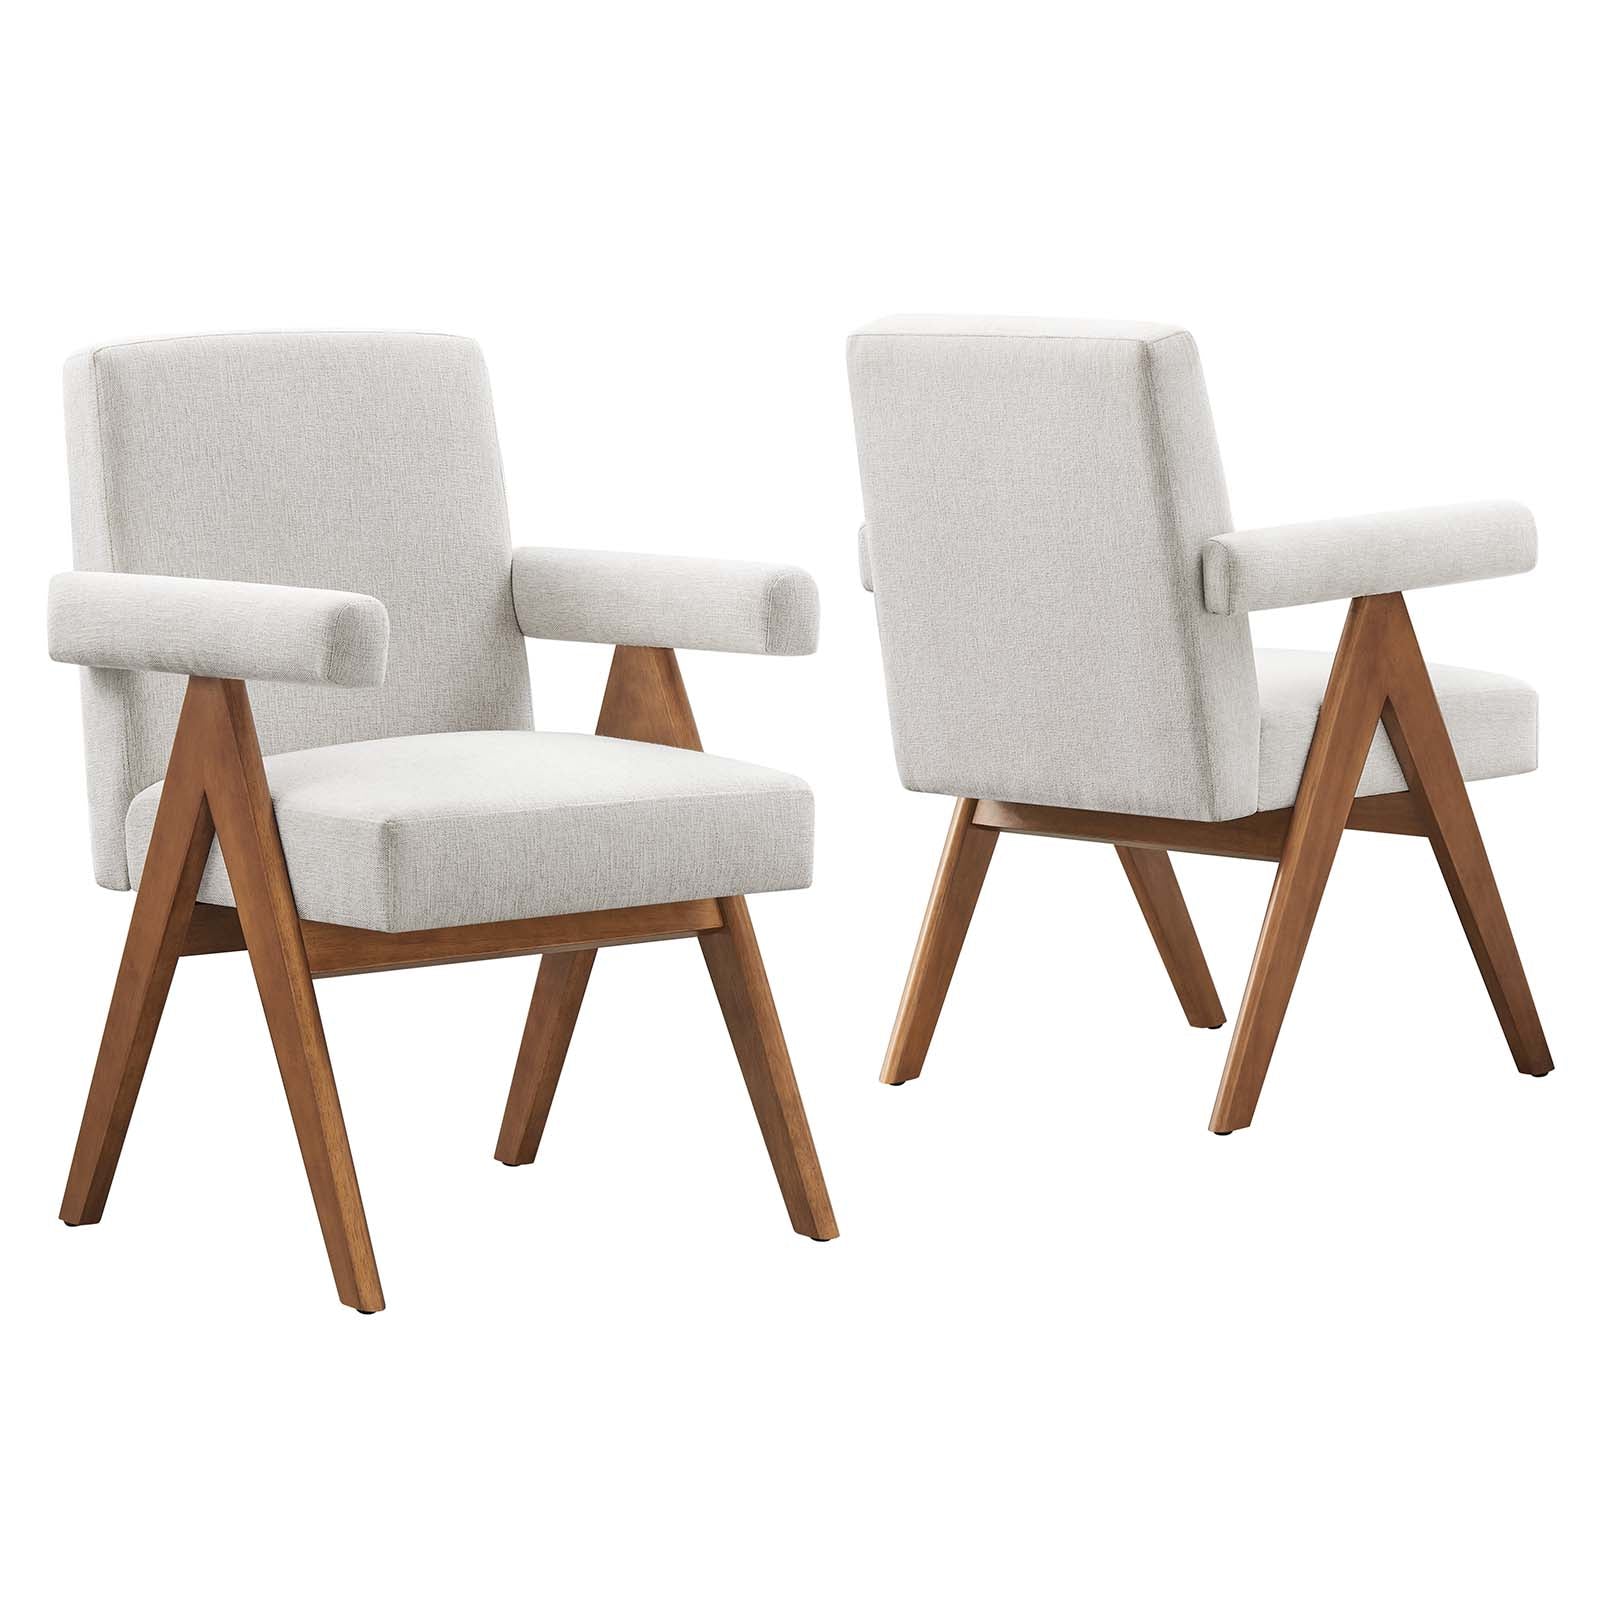 Lyra Fabric Dining Room Chair - Set of 2 - East Shore Modern Home Furnishings